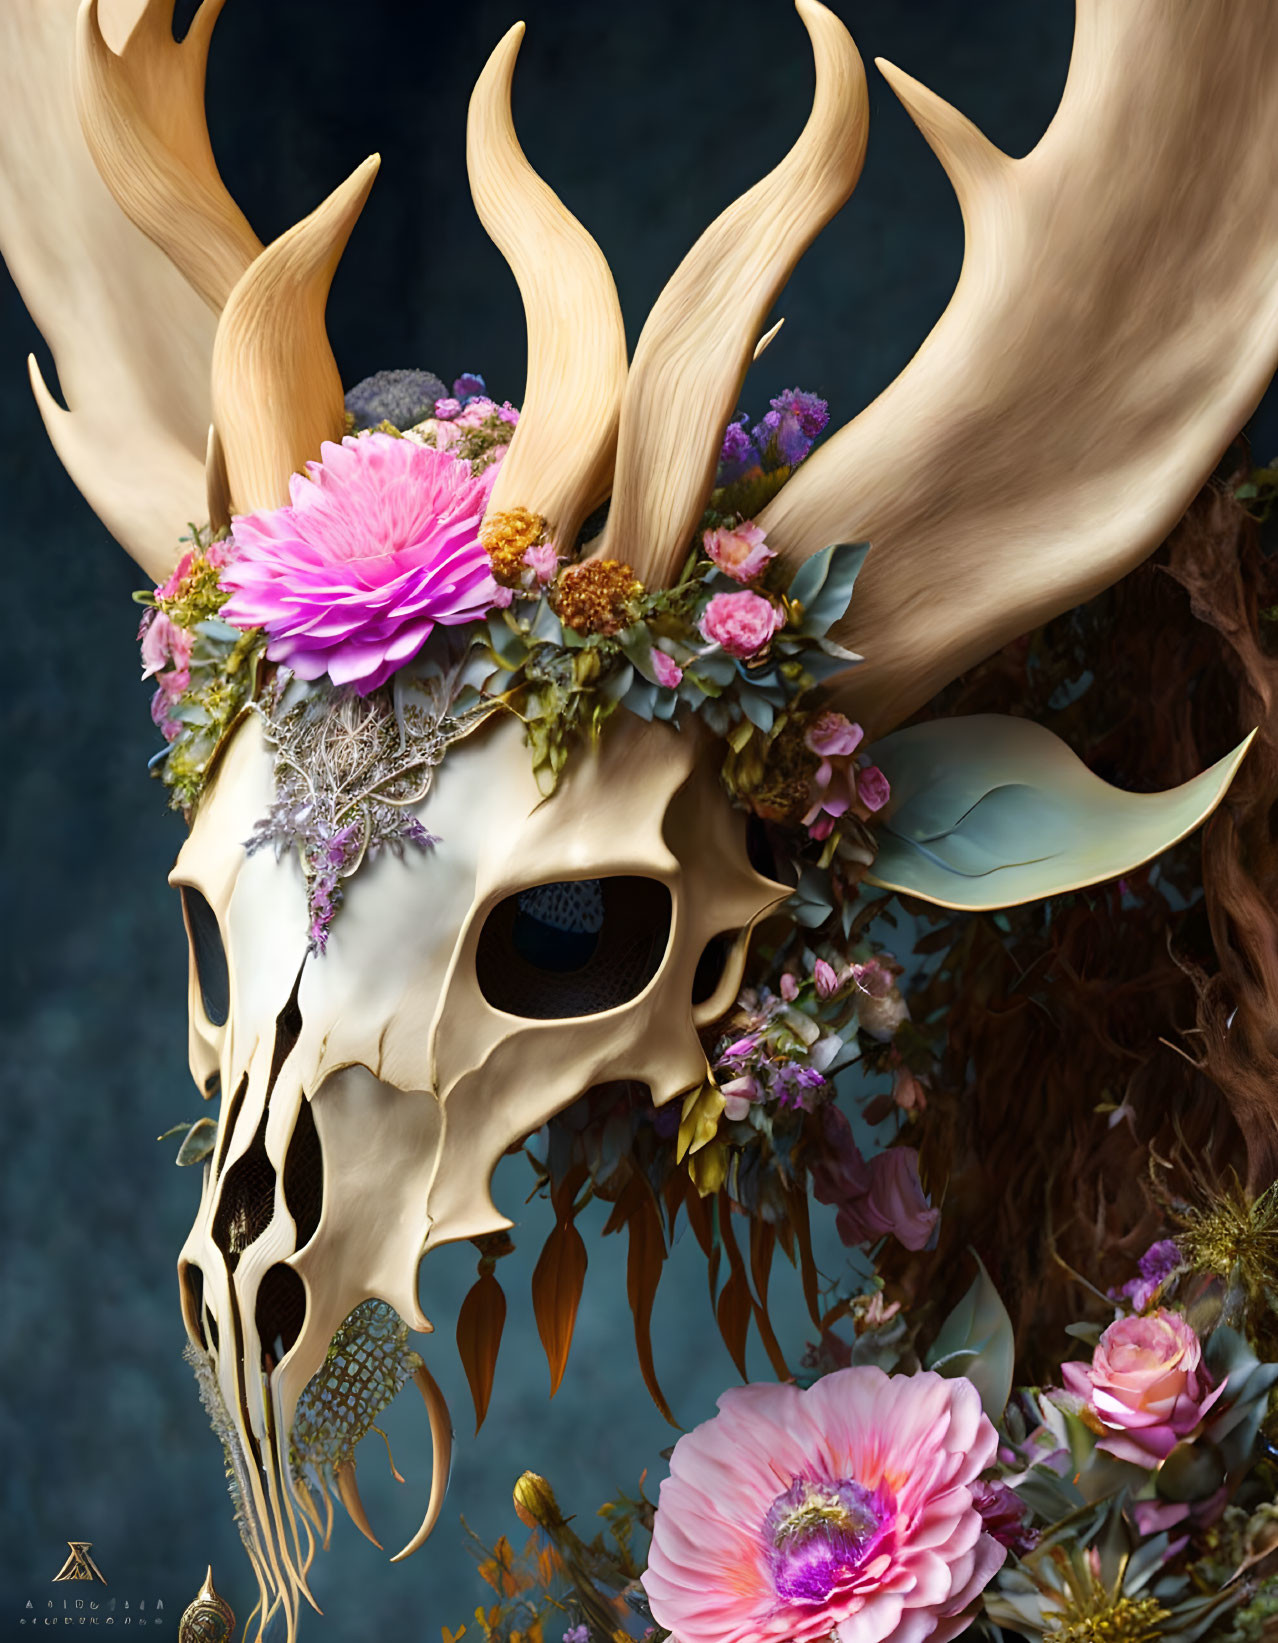 Ornate skull with antlers and vibrant flowers on dark background